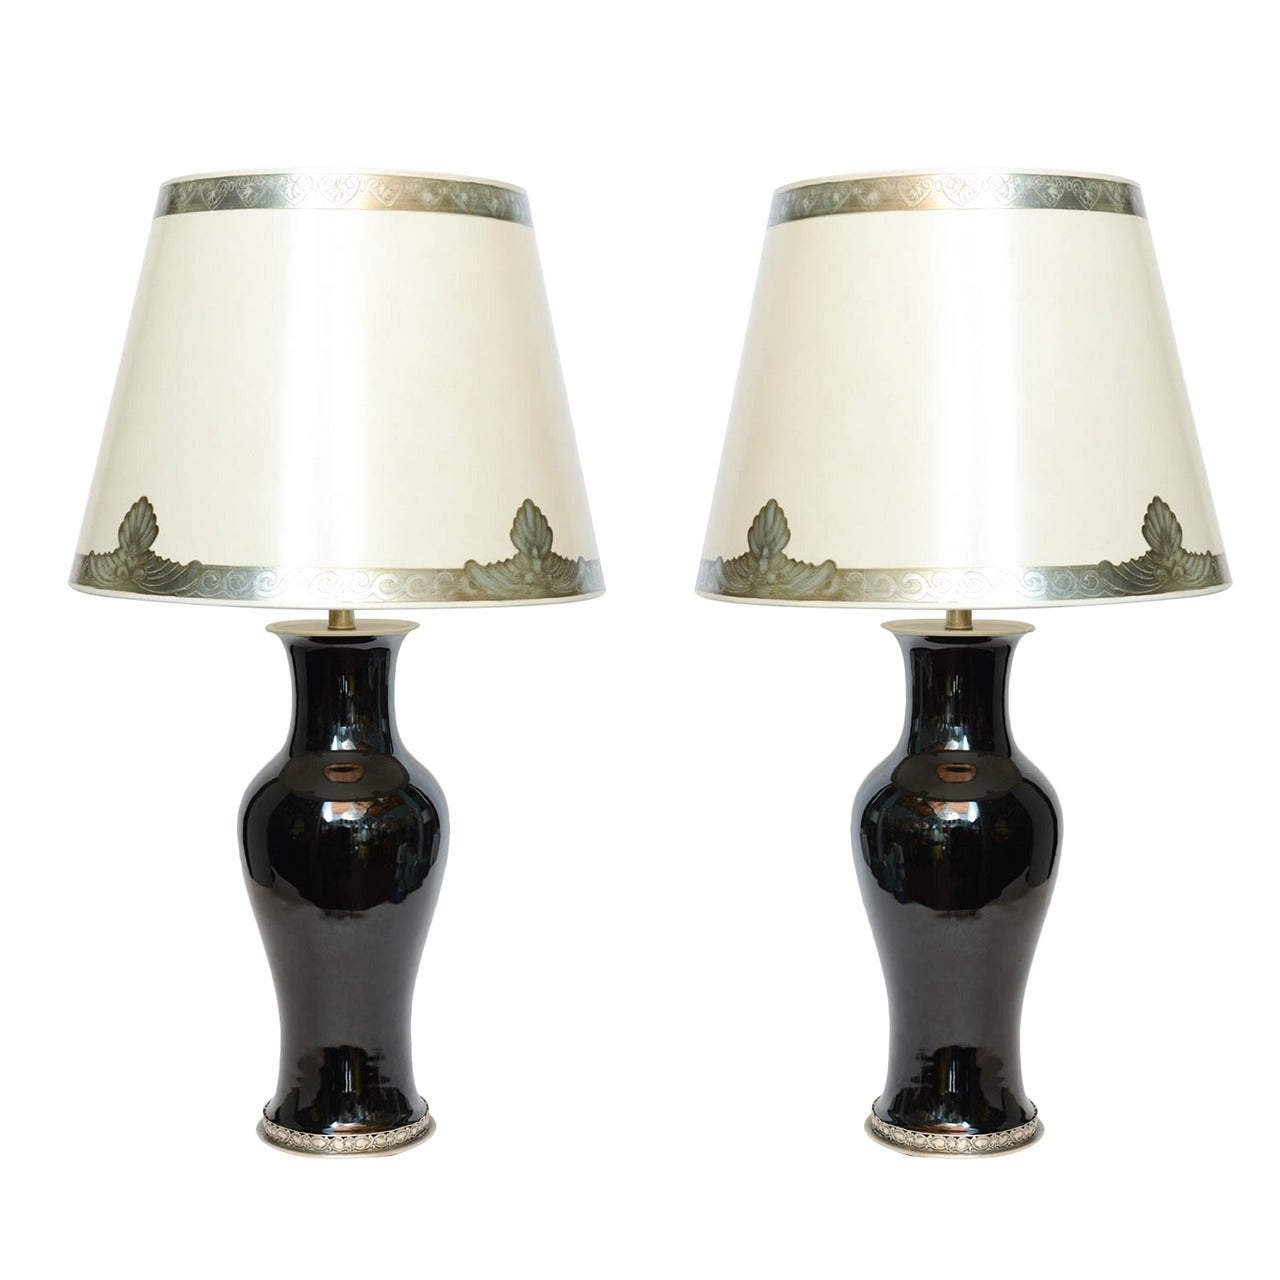 A Pair Of Chinese Porcelain Black Mirror Glazed Vase Lamps